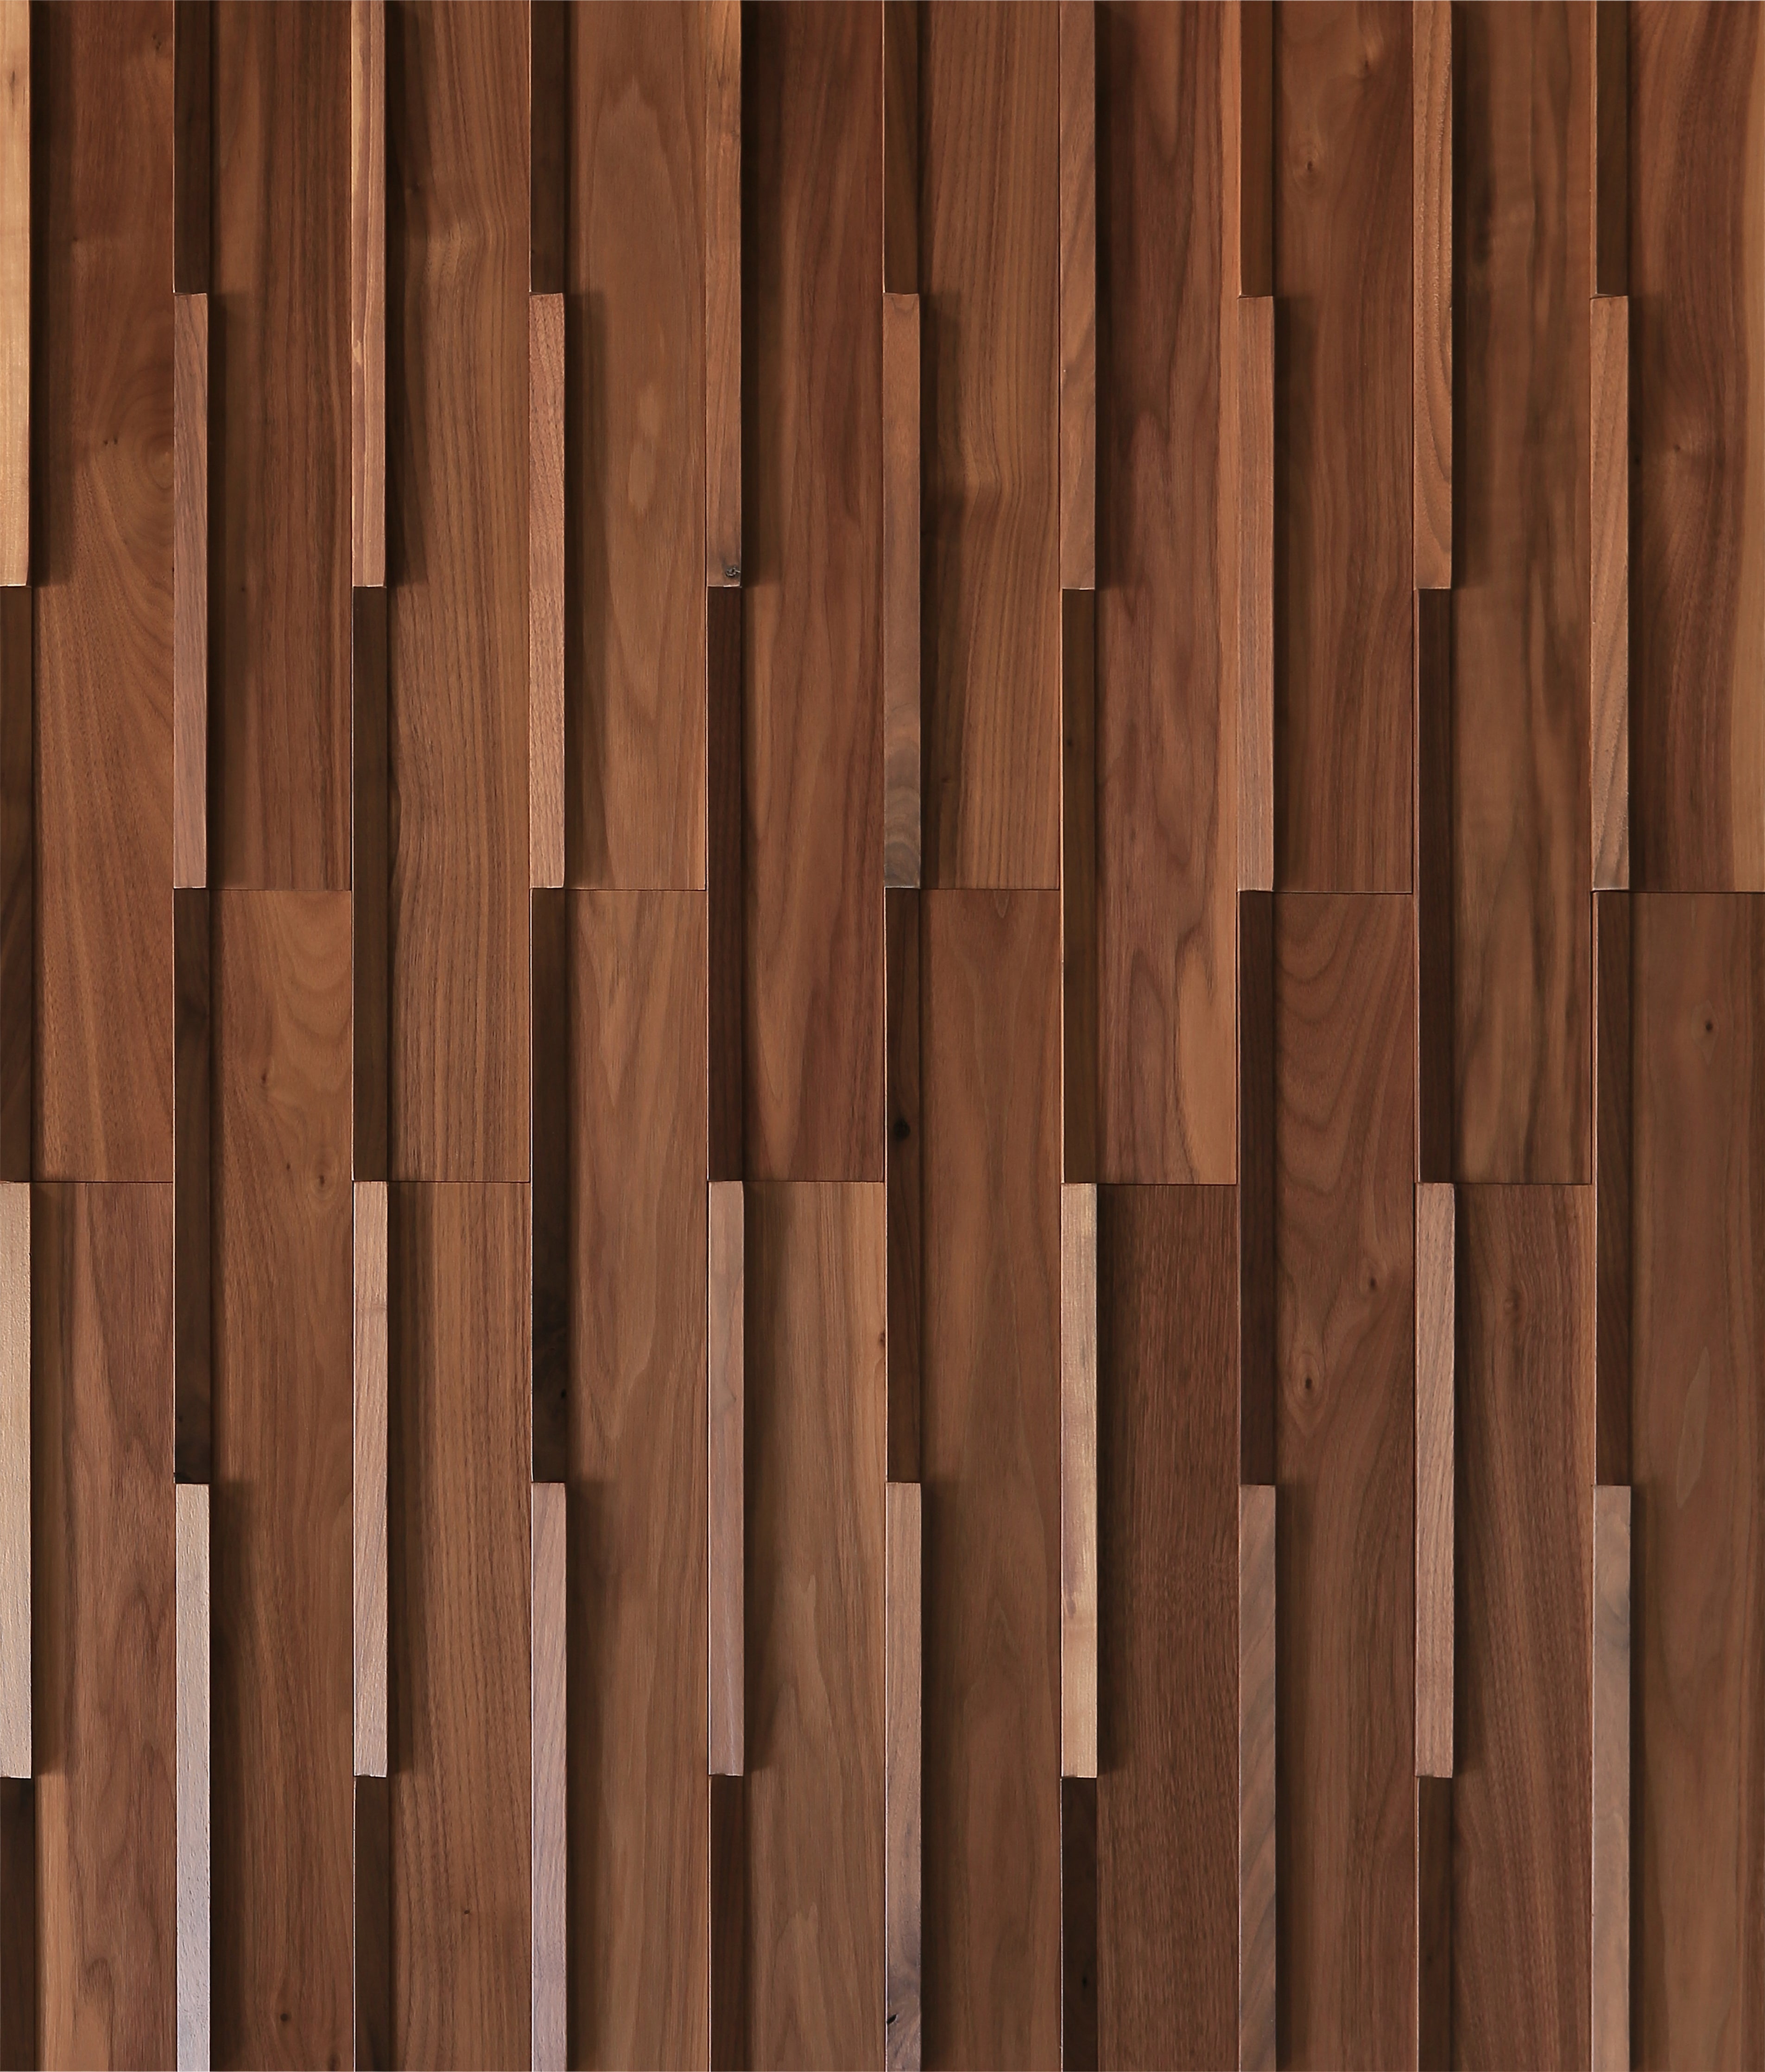 duchateau inceptiv edge american walnut three dimensional wall natural wood panel conversion varnish for interior use distributed by surface group international